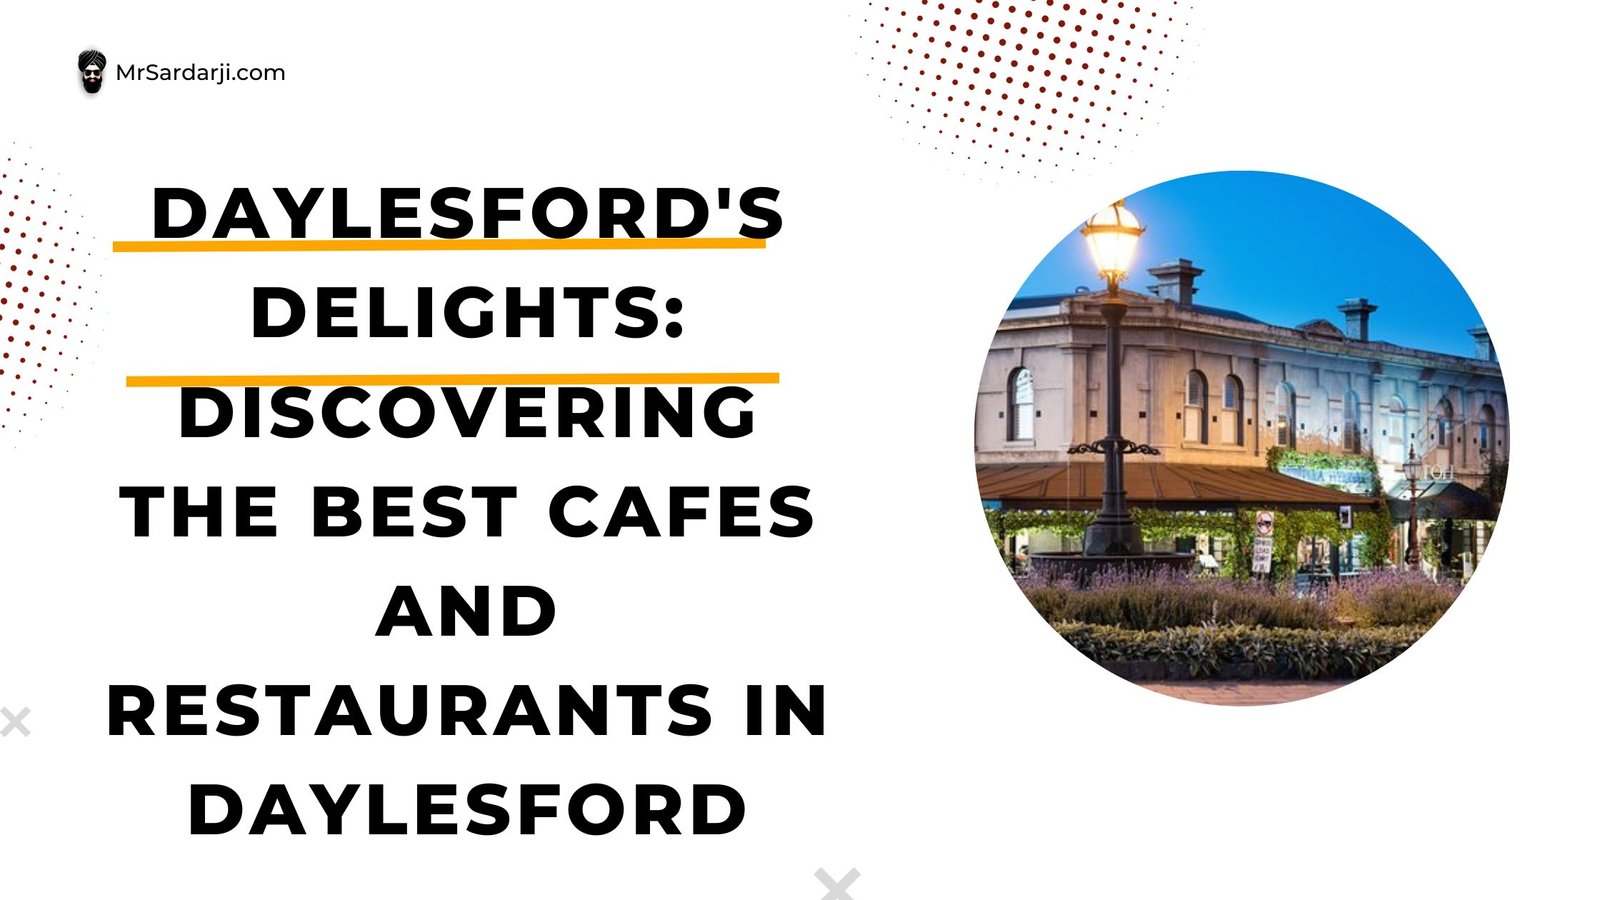 Daylesford's Delights: discovering the best cafes and restaurants in Daylesford